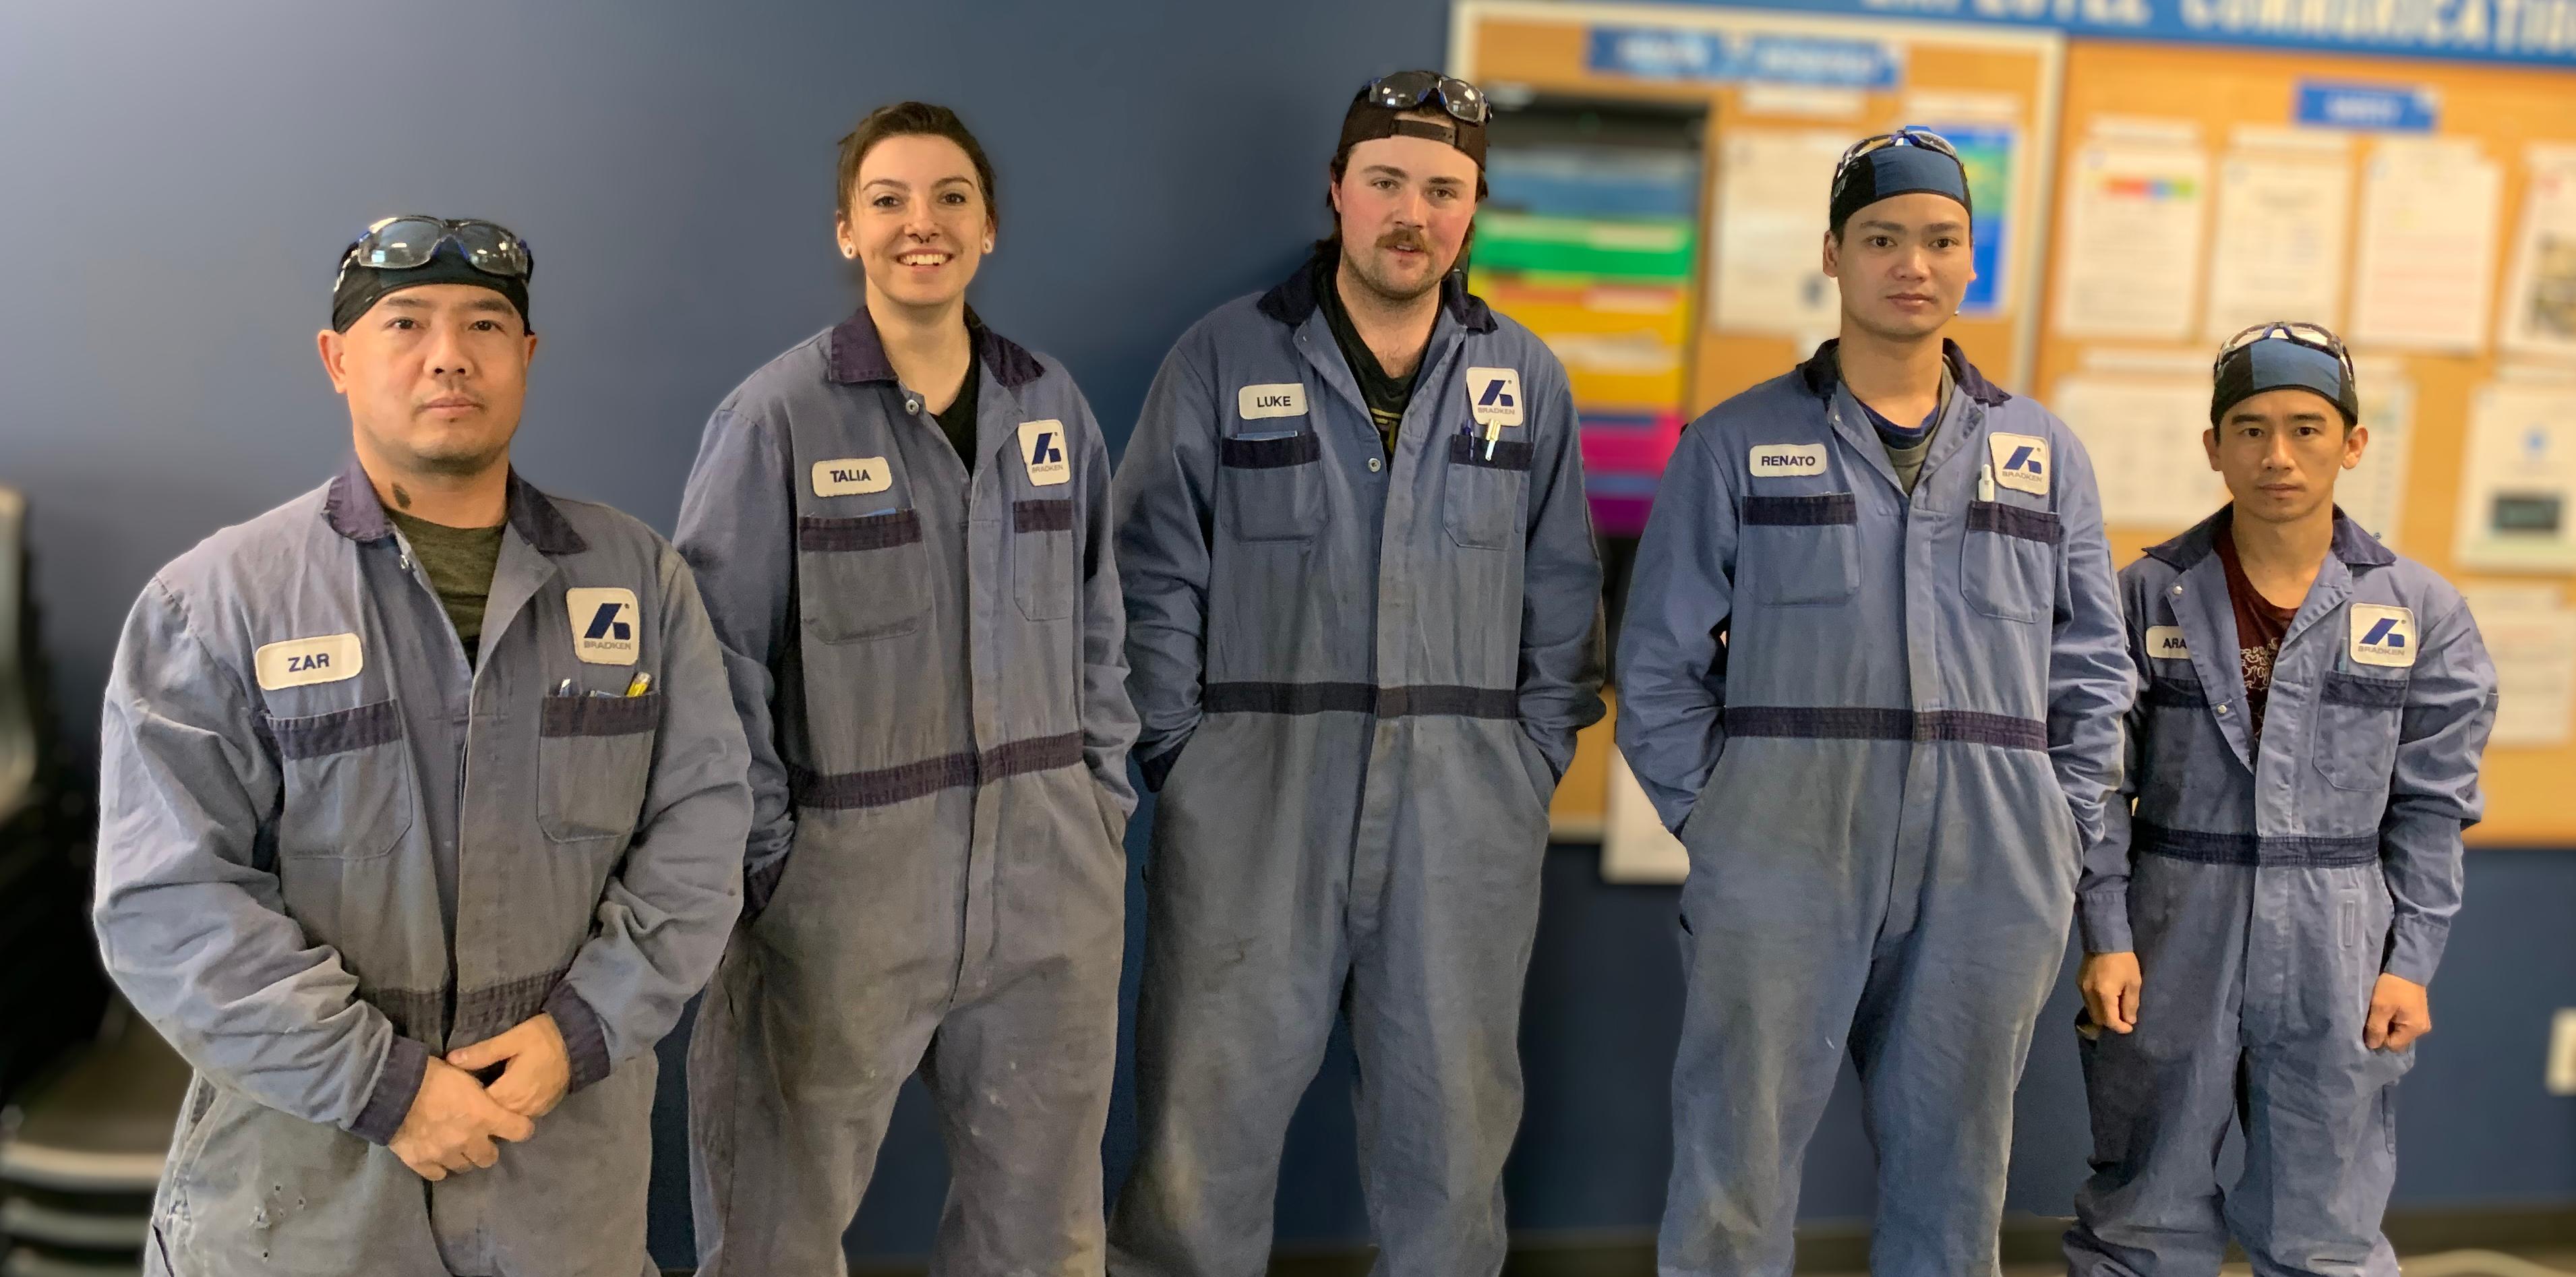 Five workers, four men and one woman, stand in a row. All are wearing blue coveralls with the Bradken logo on them.